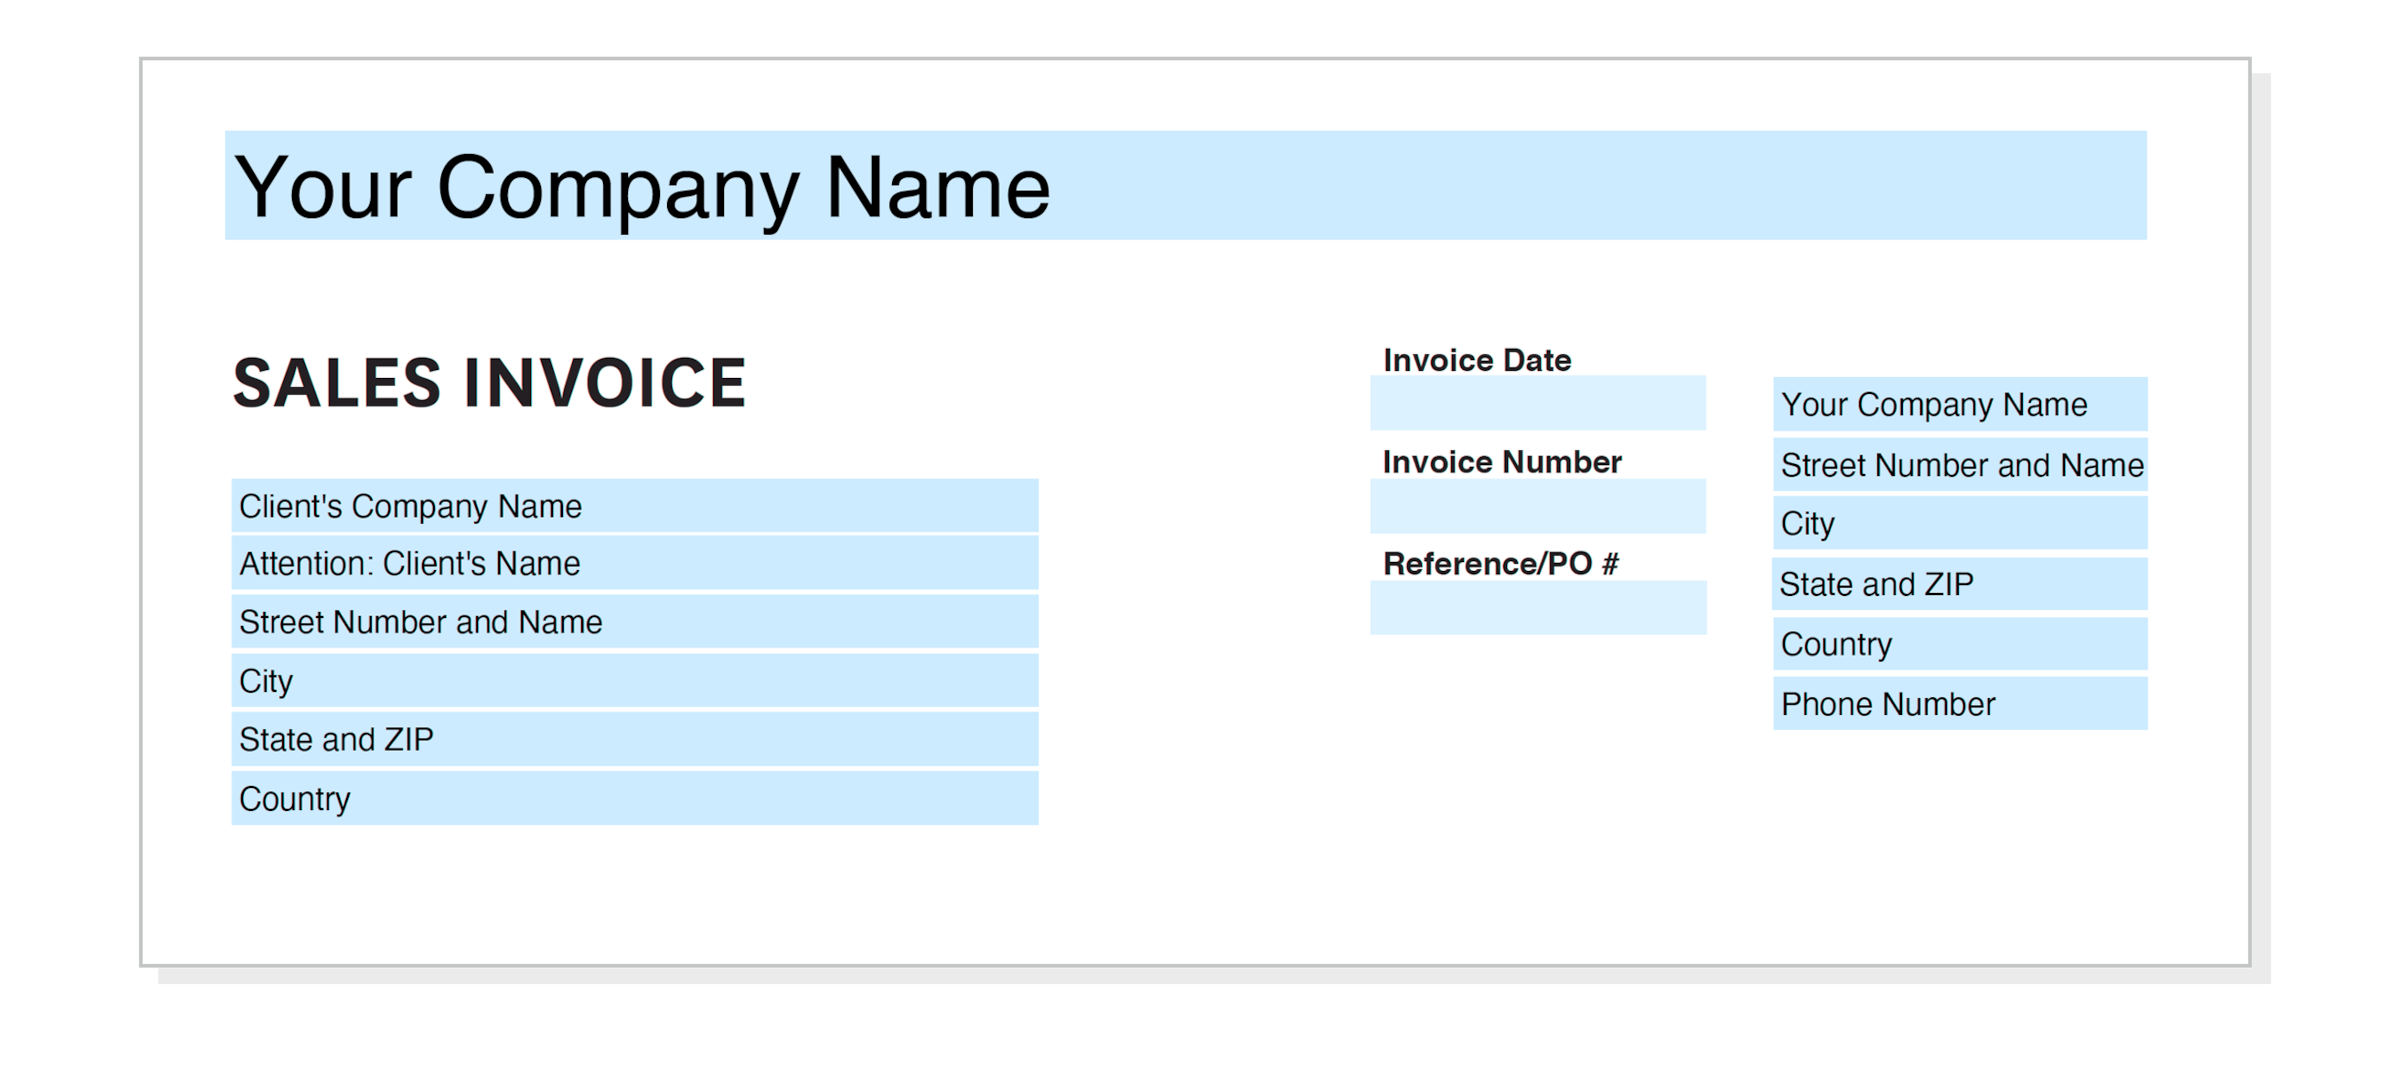 Top section of a medical invoice where a healthcare provider and customer’s details are entered.